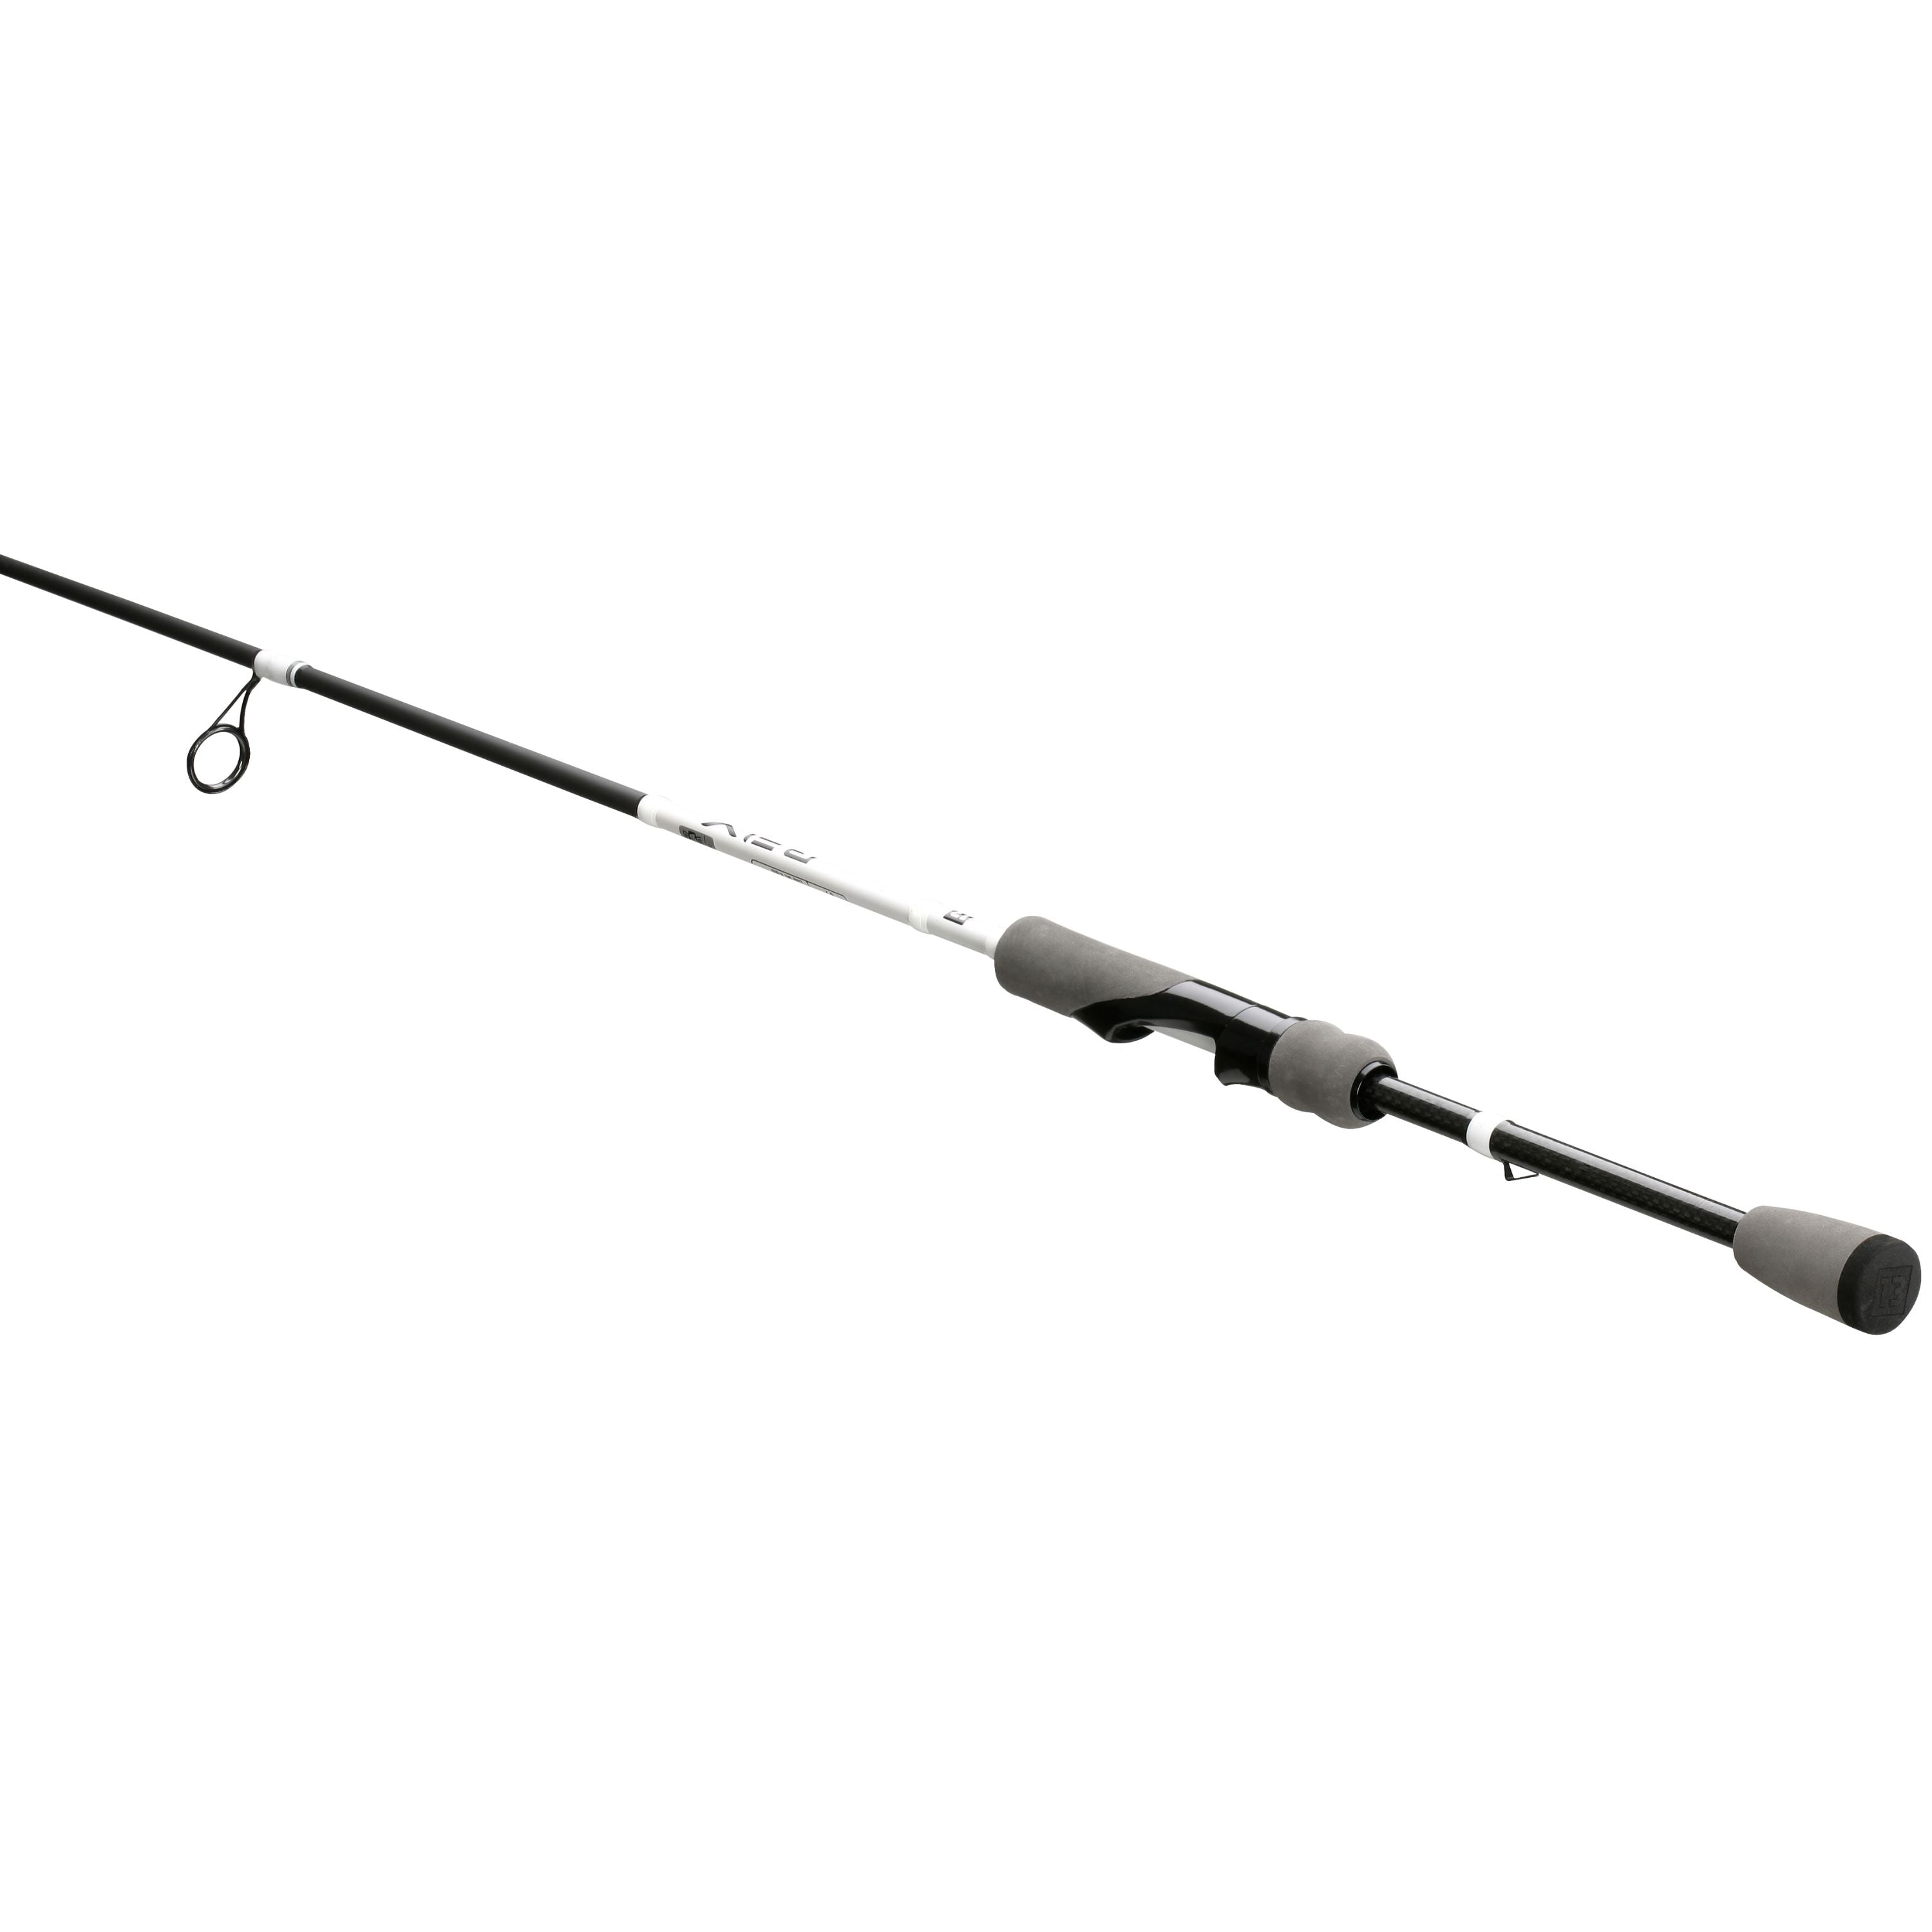 "Rely Black" Spinning rod